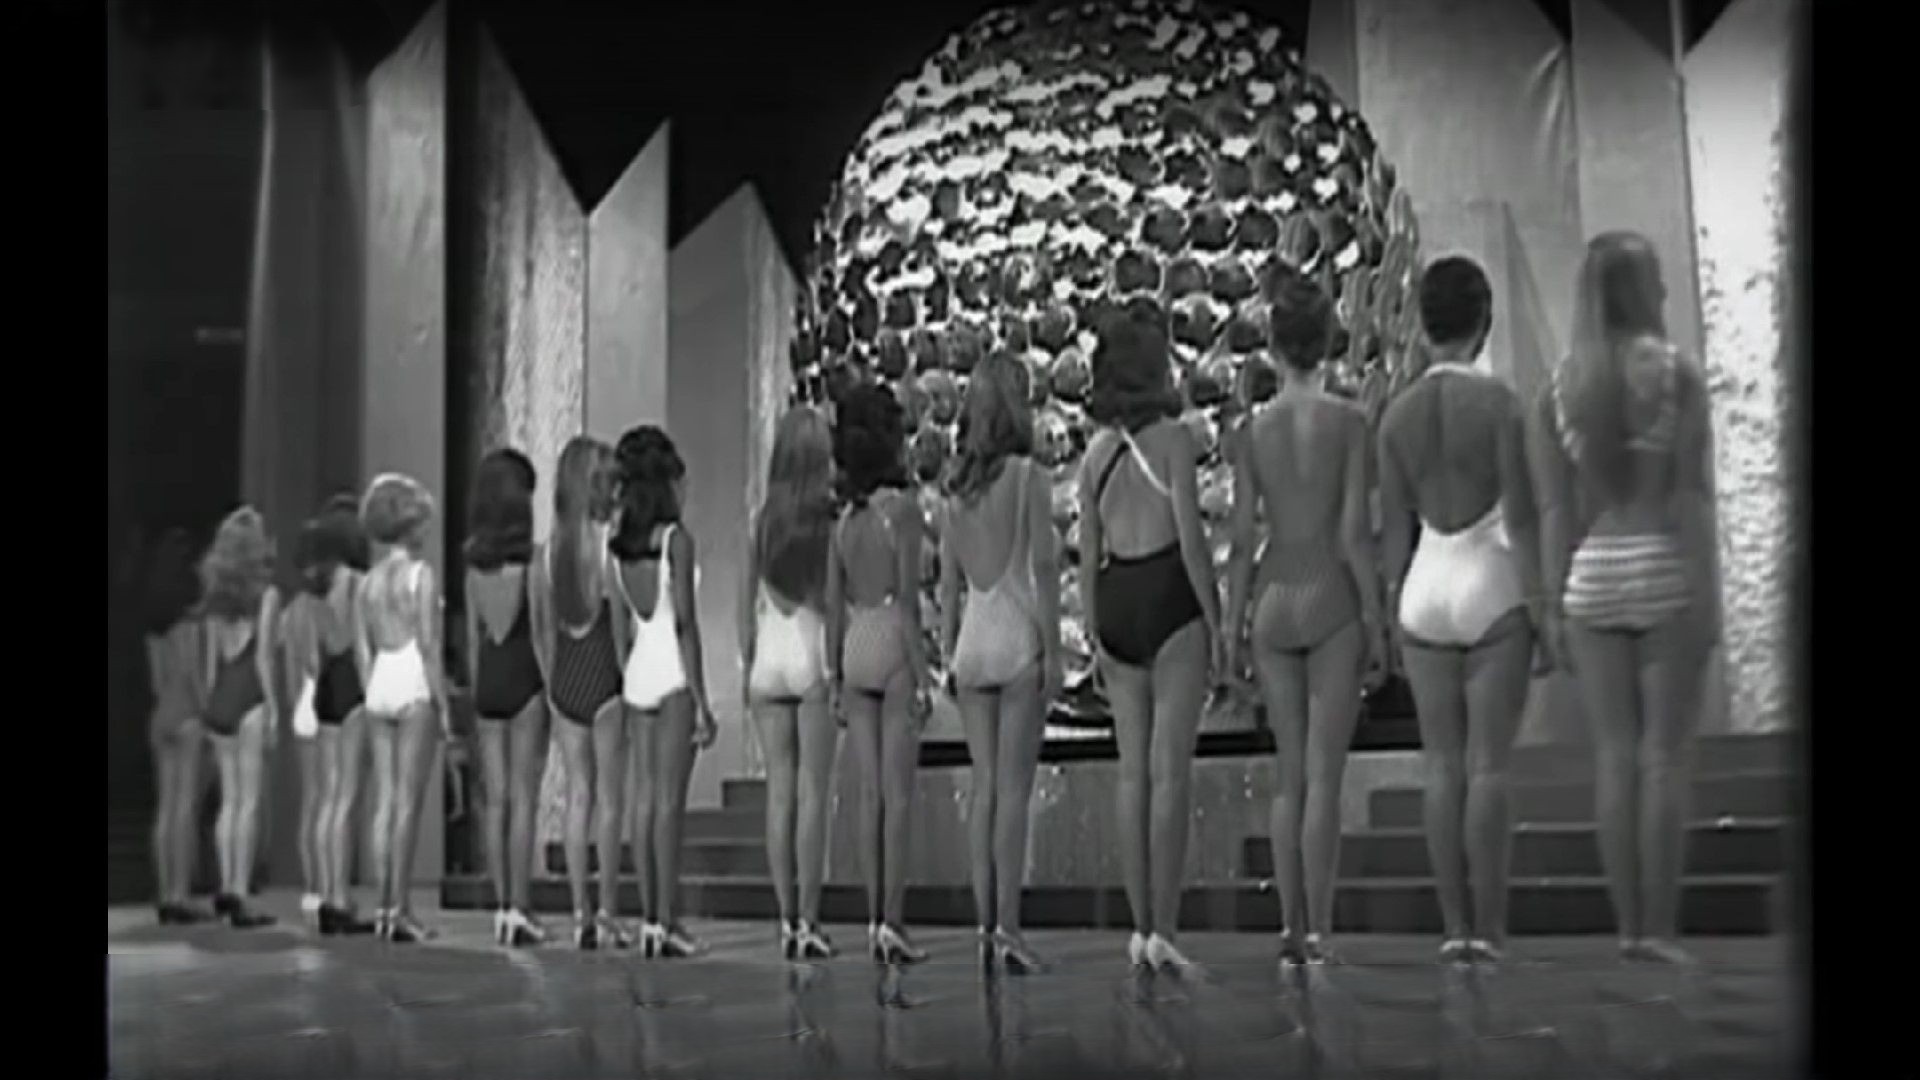 "Turning the Girls" - Miss World contest swimsuit format in the 1960s 97SoE3